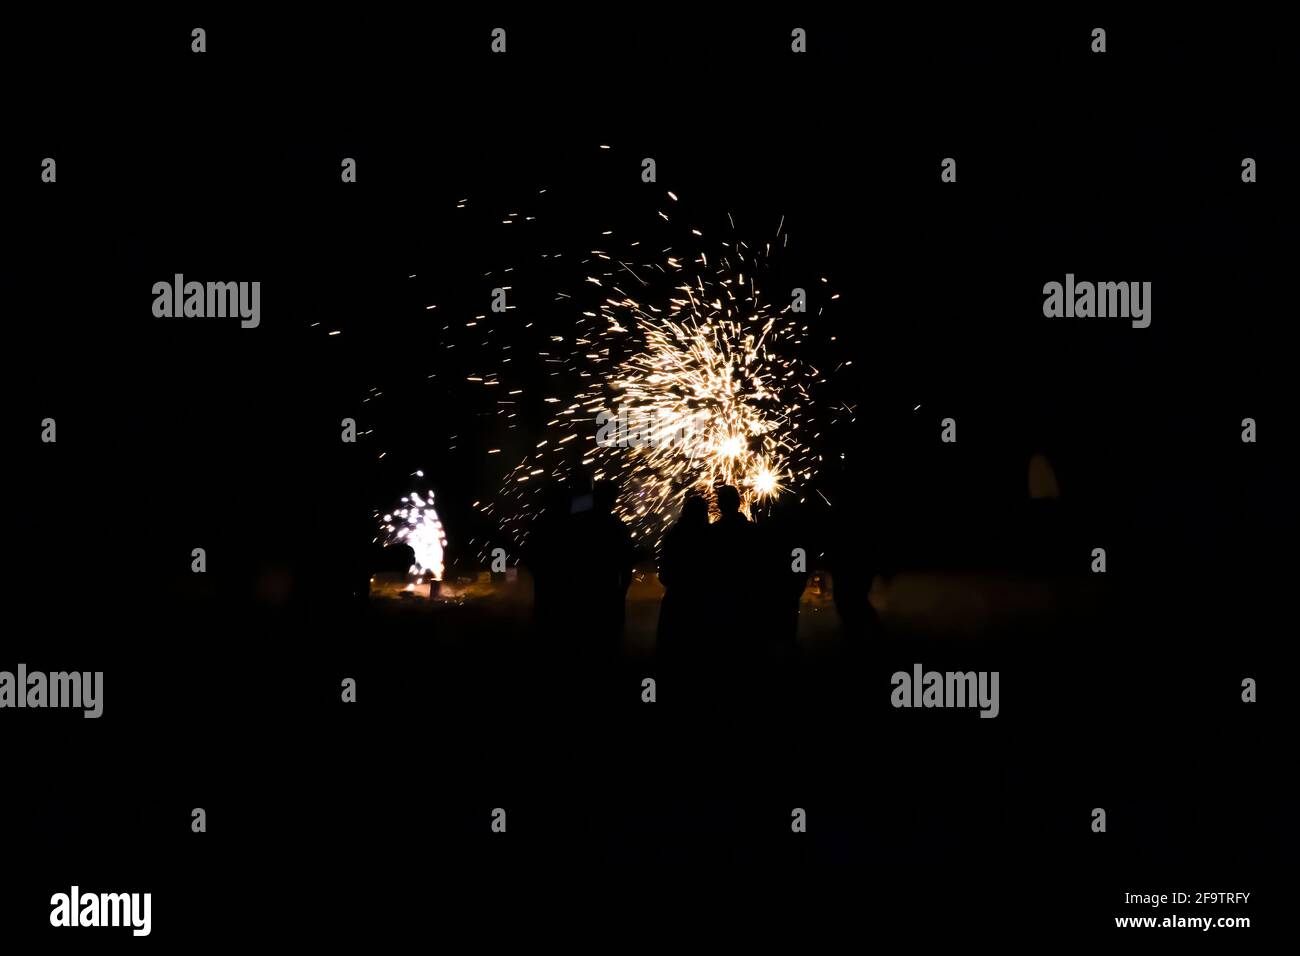 Group of people in silhouette watch colorful fireworks explode on a beach at night. Stock Photo